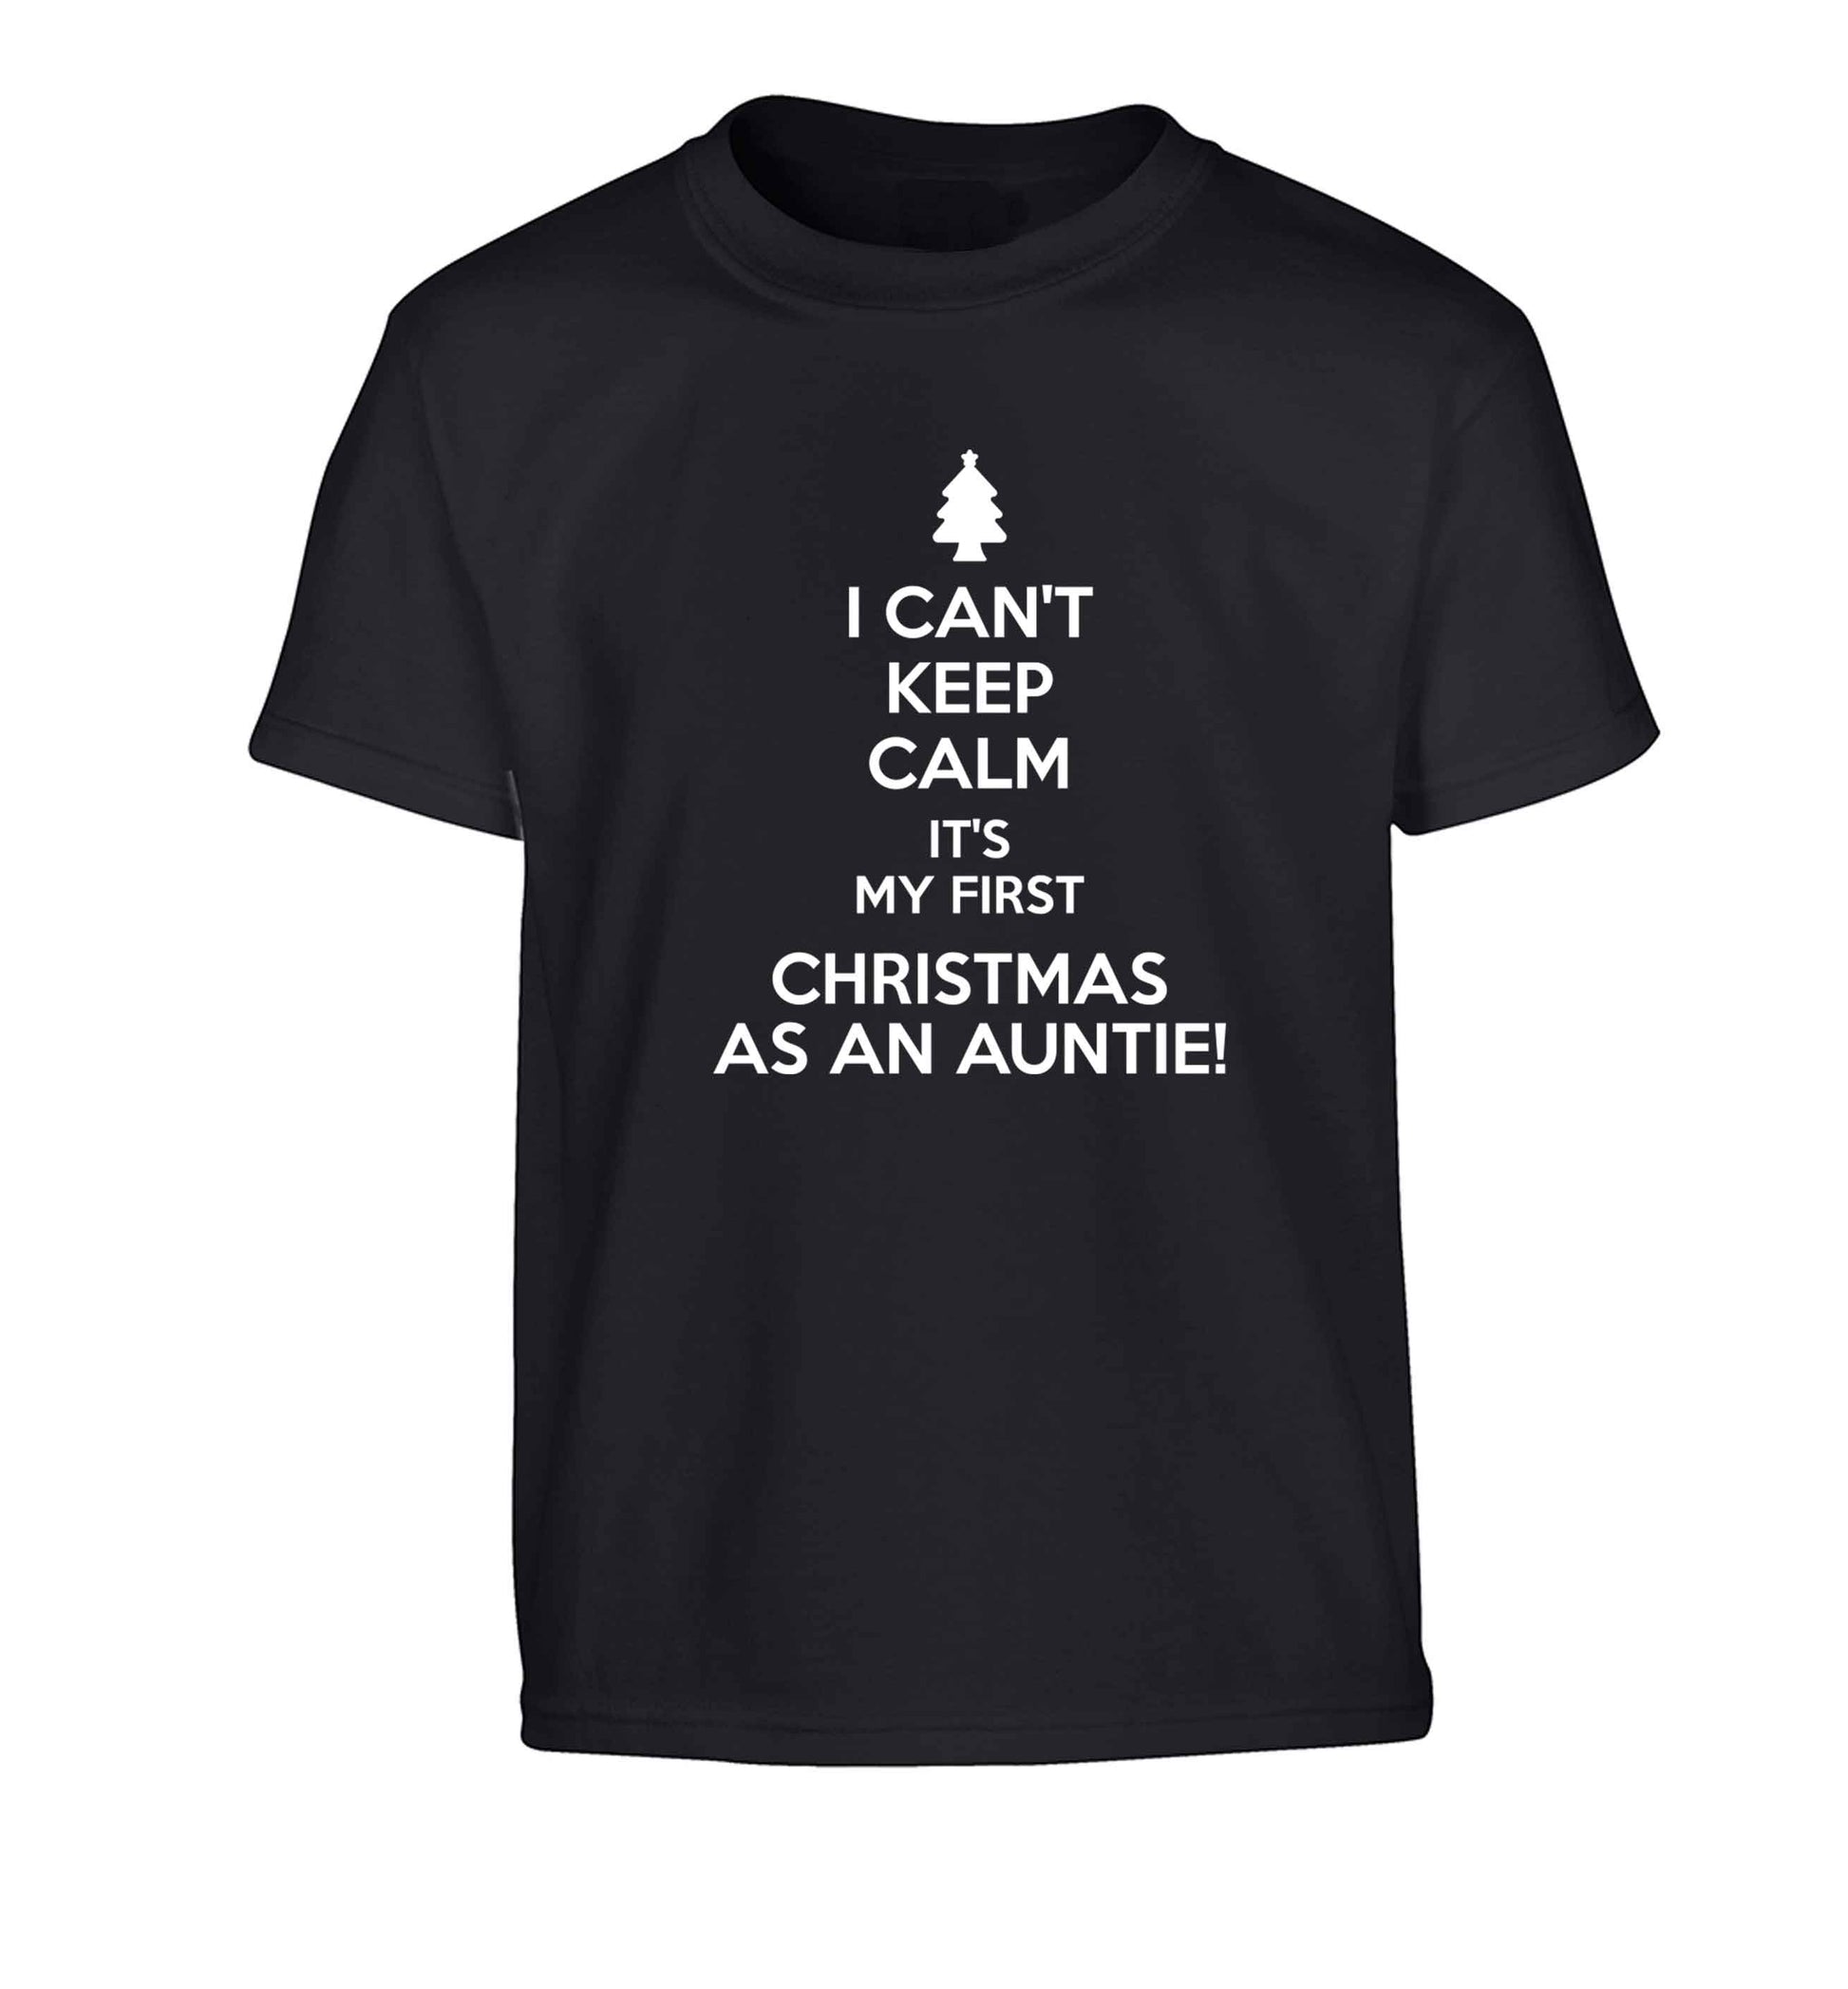 I can't keep calm it's my first Christmas as an auntie! Children's black Tshirt 12-13 Years